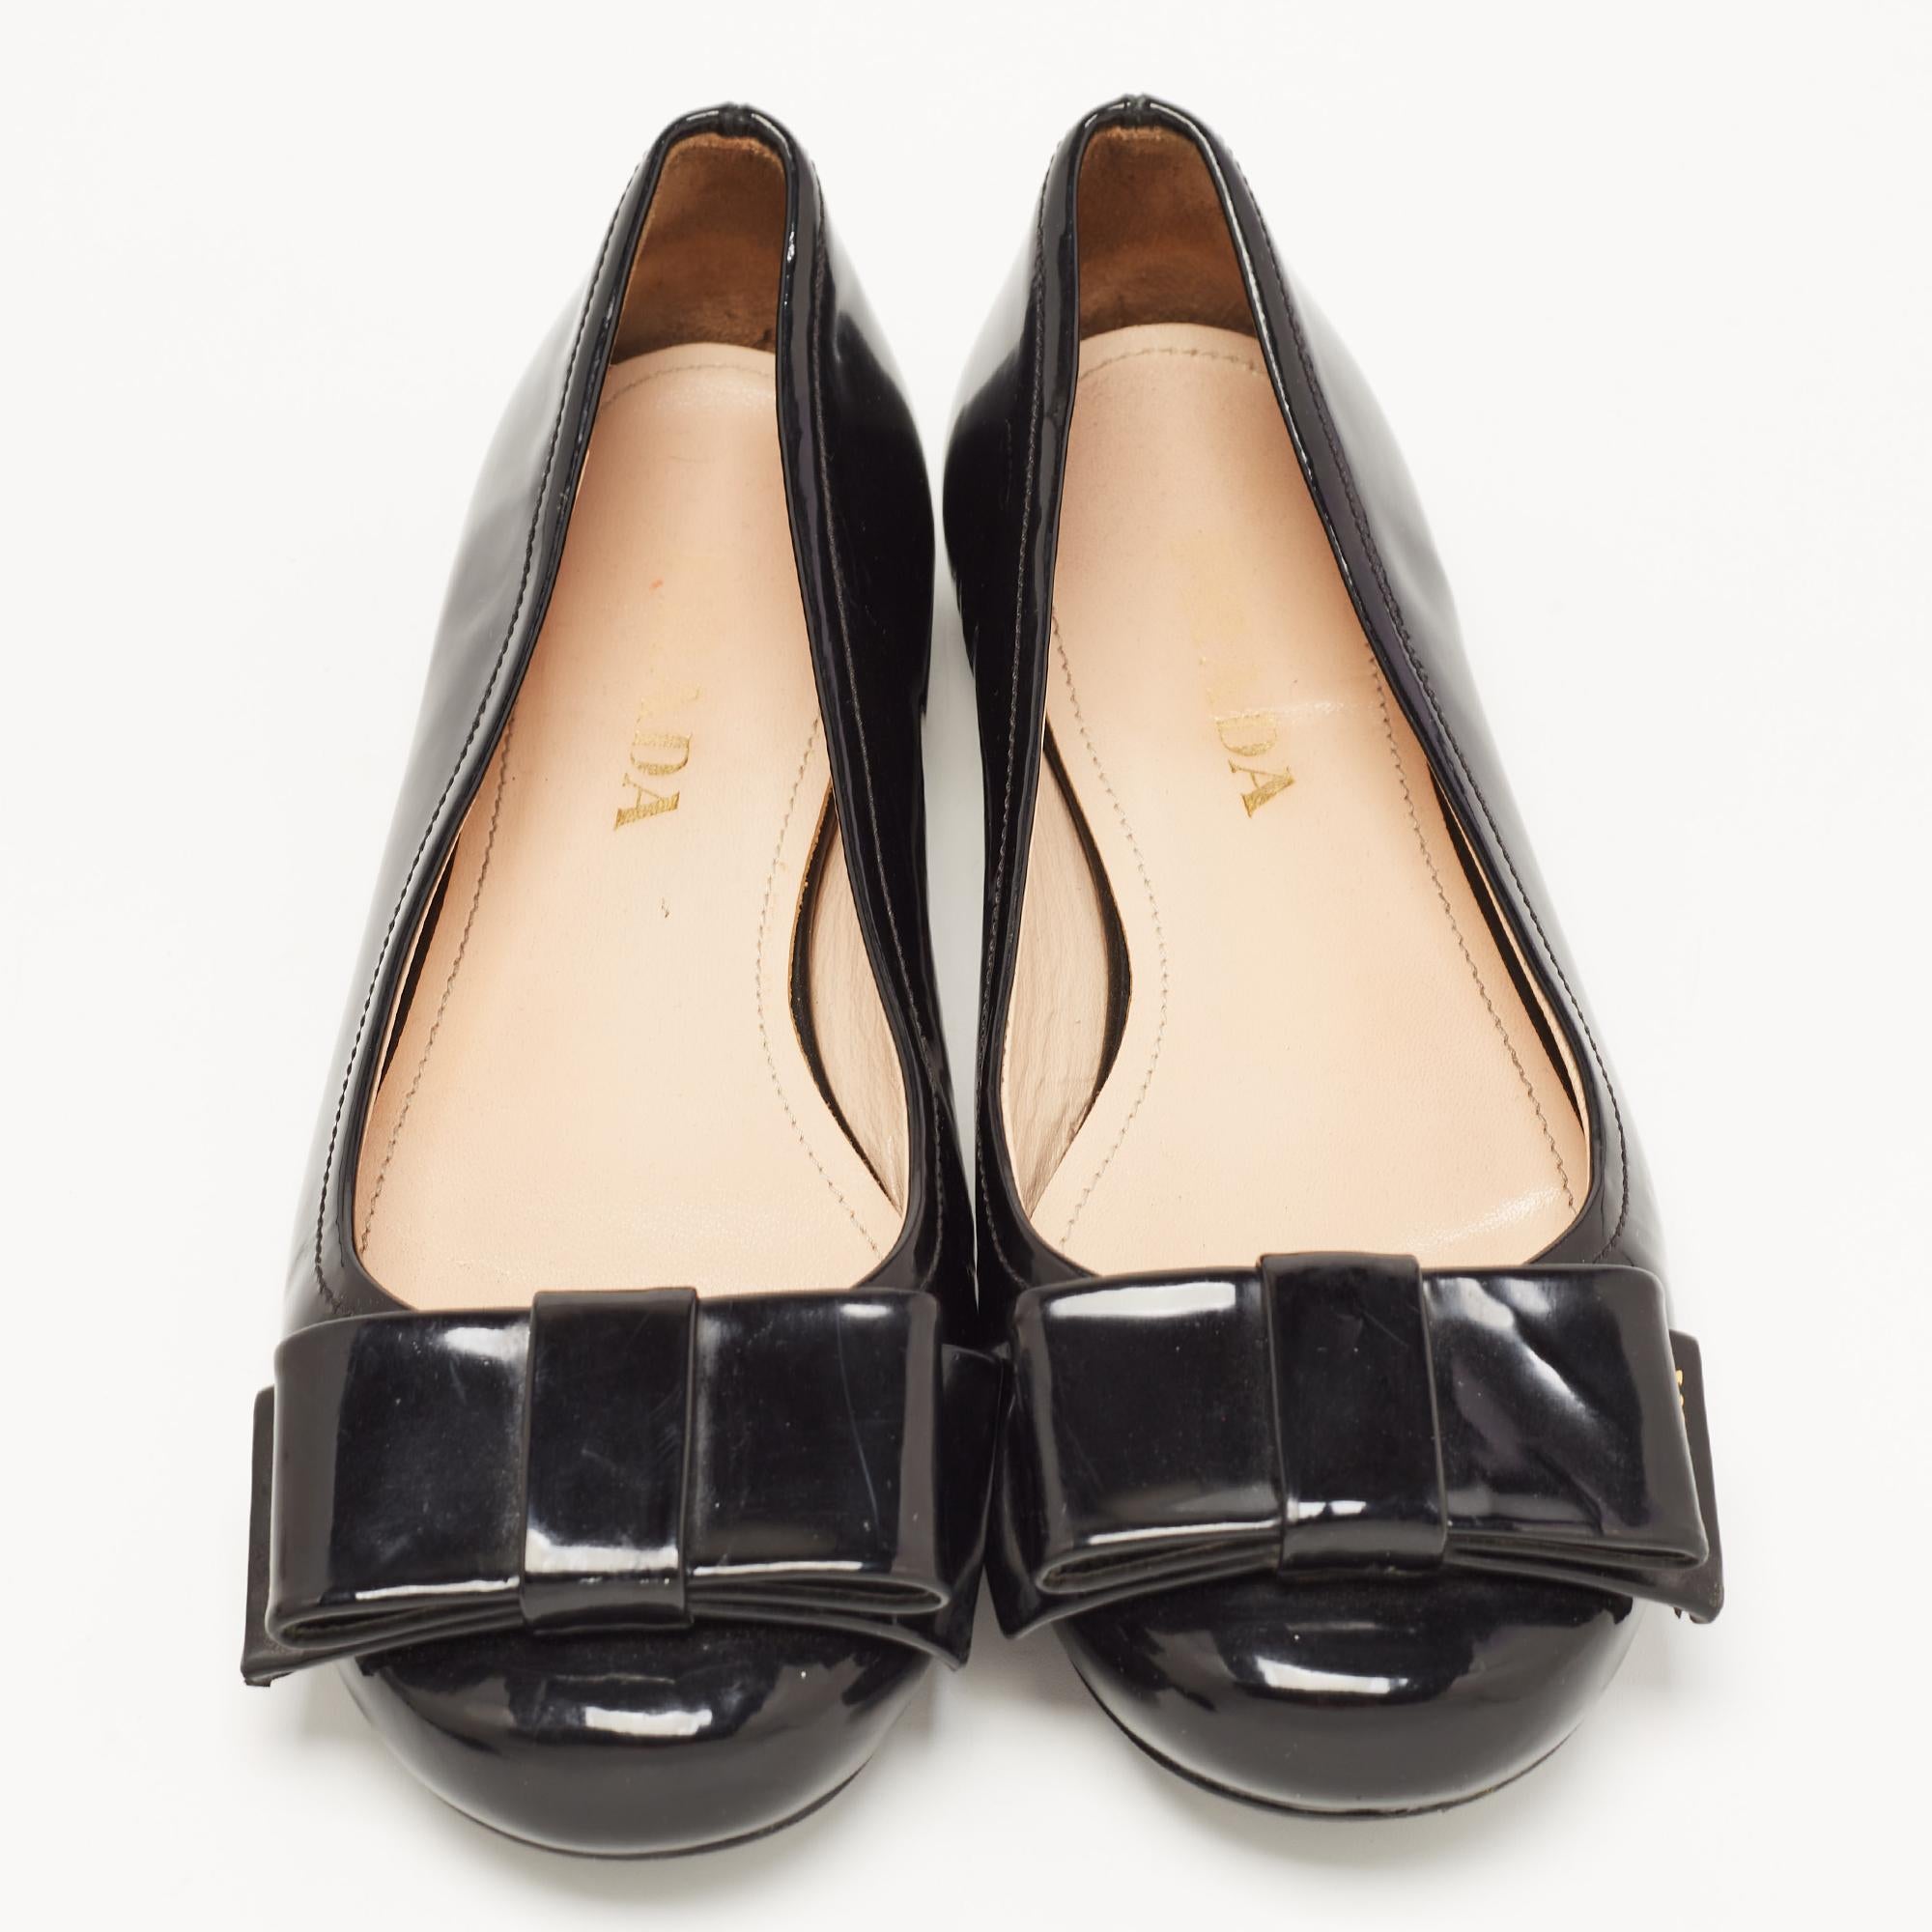 These Prada ballet flats are perfect for channeling an air of elegance! These black flats have been crafted from patent leather and styled with round toes and bows. They are complete with comfortable insoles and tough soles.

